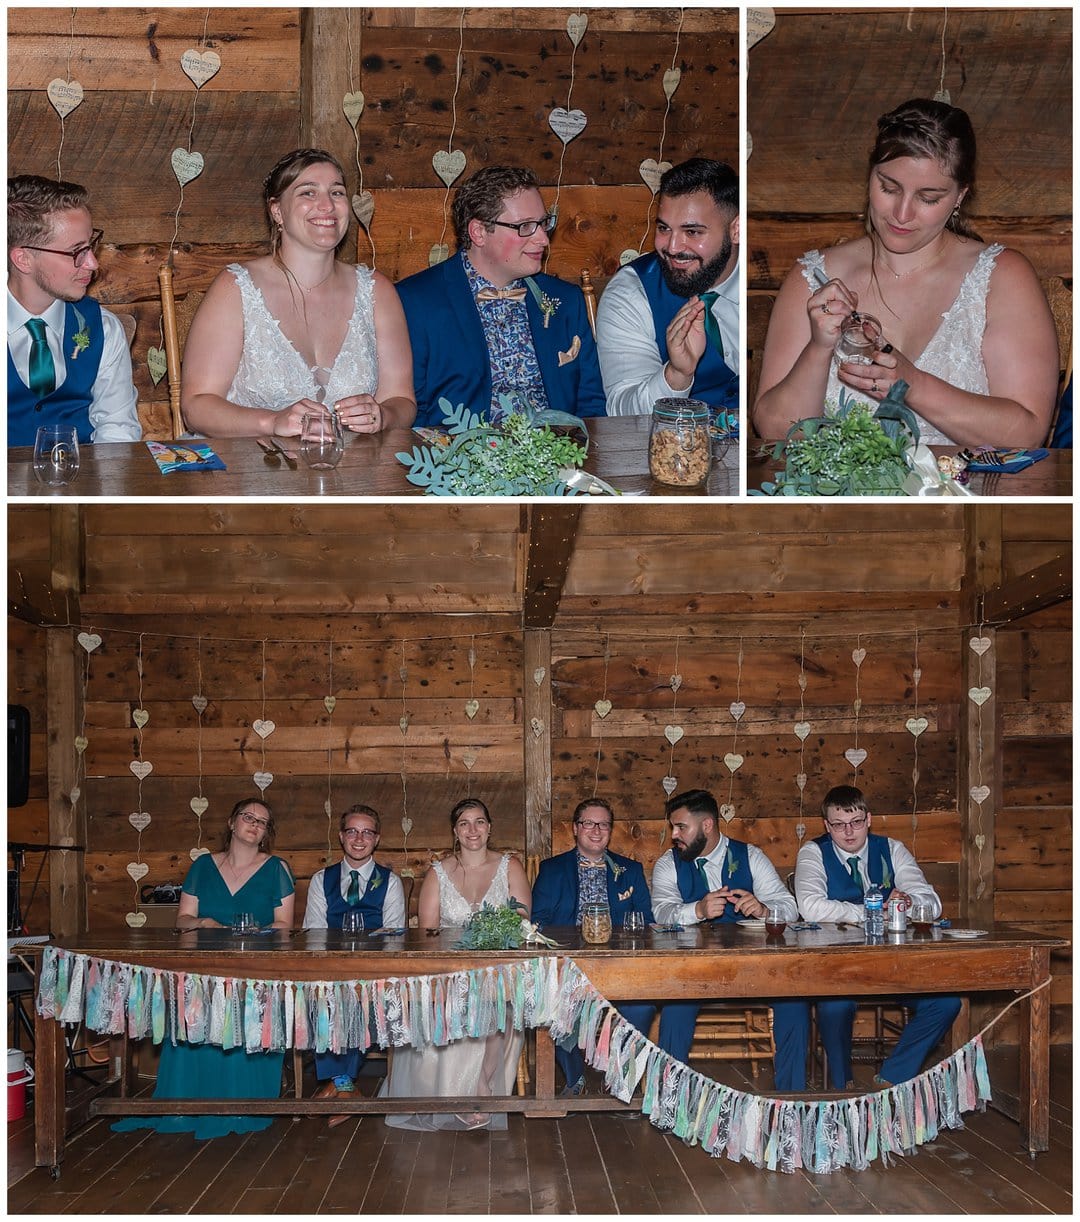 The bride and groom sit at the head table during their wedding reception at the Barn at Sadie Belle Farm.